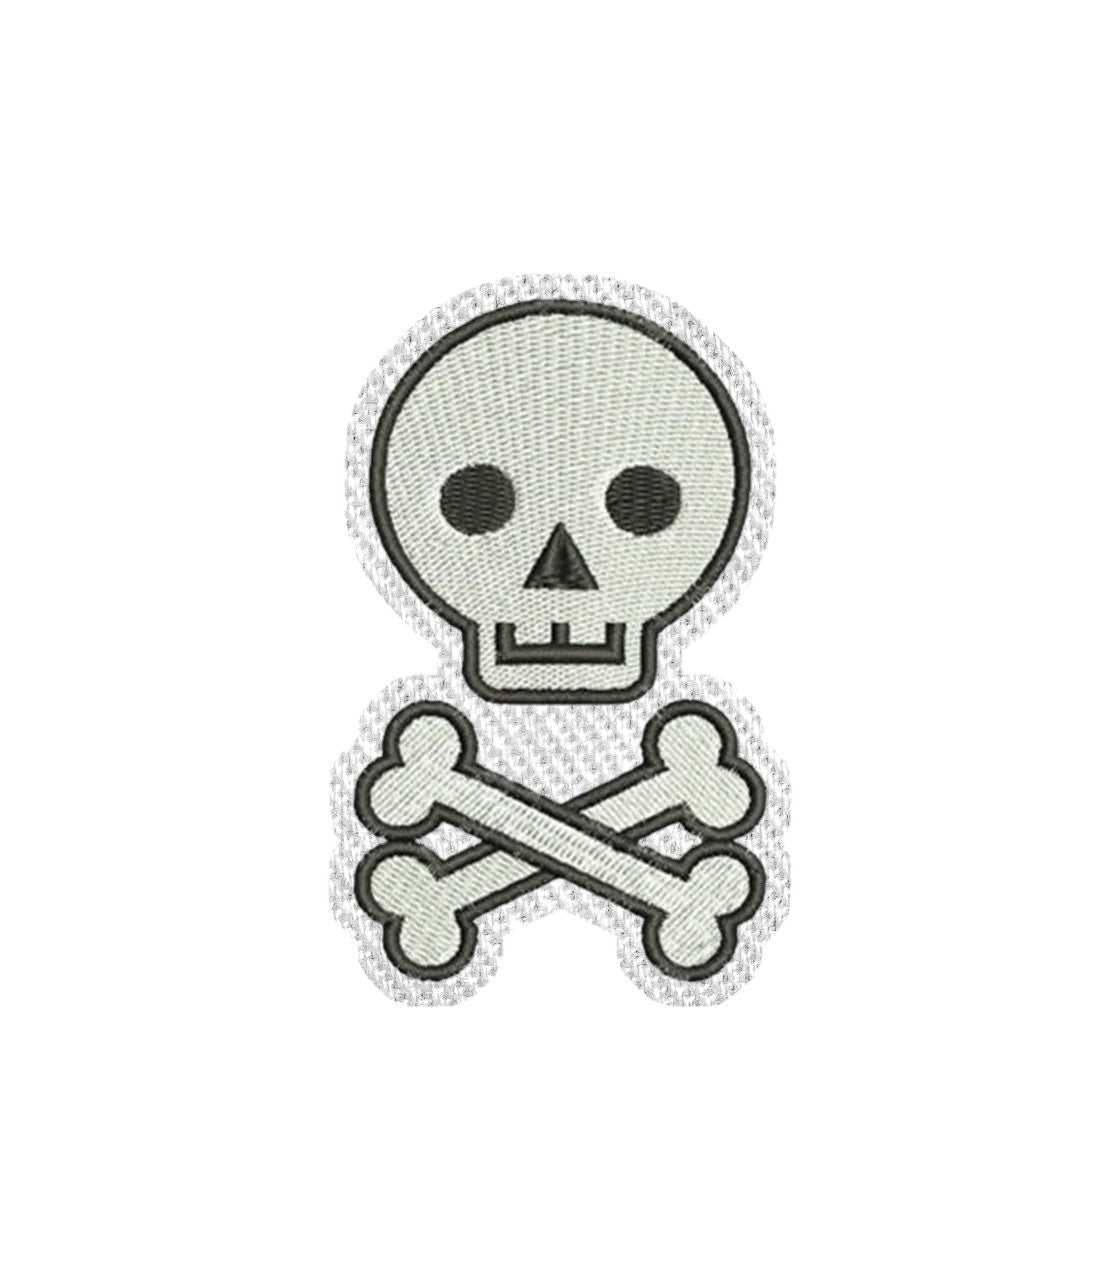 Halloween Skull Iron on Patch / Sew on embroidered patches - Holidays Celebrations Embroidery Women Applique Merit Badge for Clothing Jacket